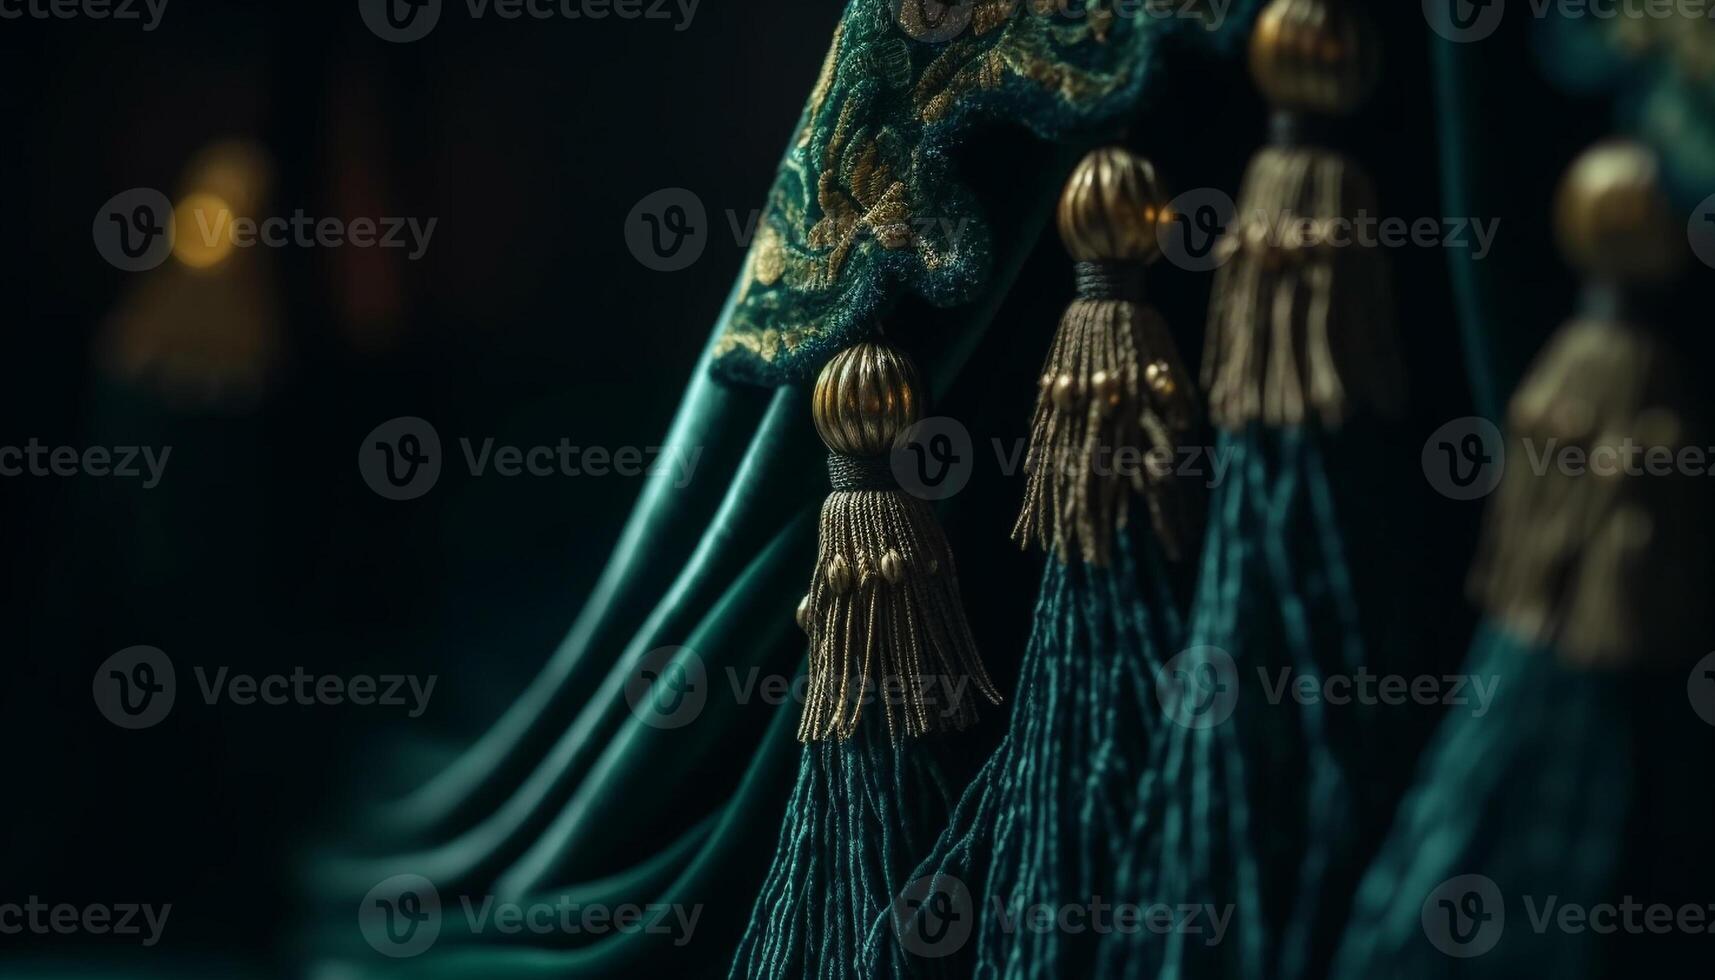 Elegance and tradition meet in this ancient silk clothing collection generated by AI photo